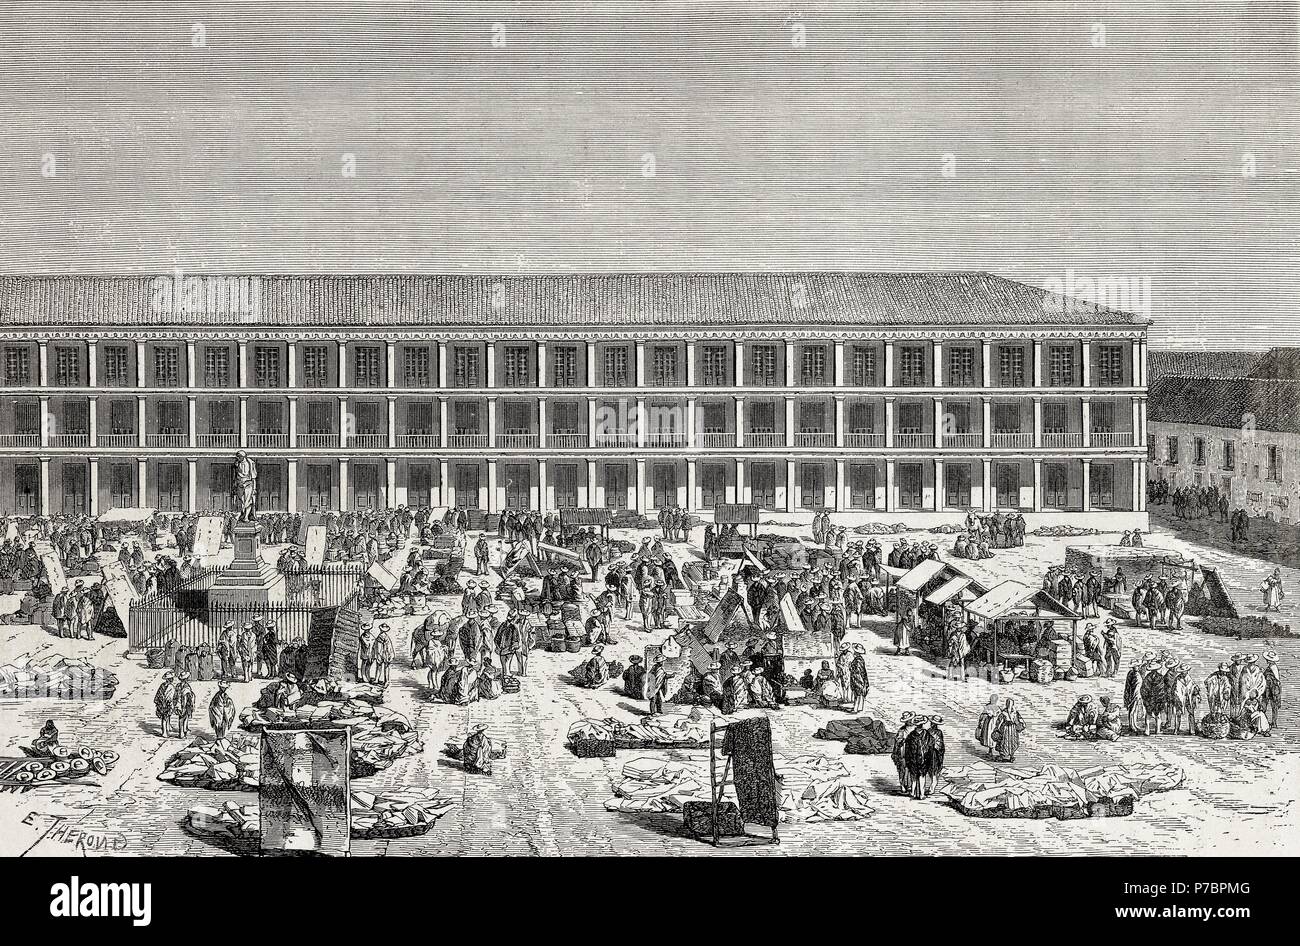 South America. Colombia. Santa Fe of Bogota. Main Square at a market day. Engraving, 1879. Stock Photo